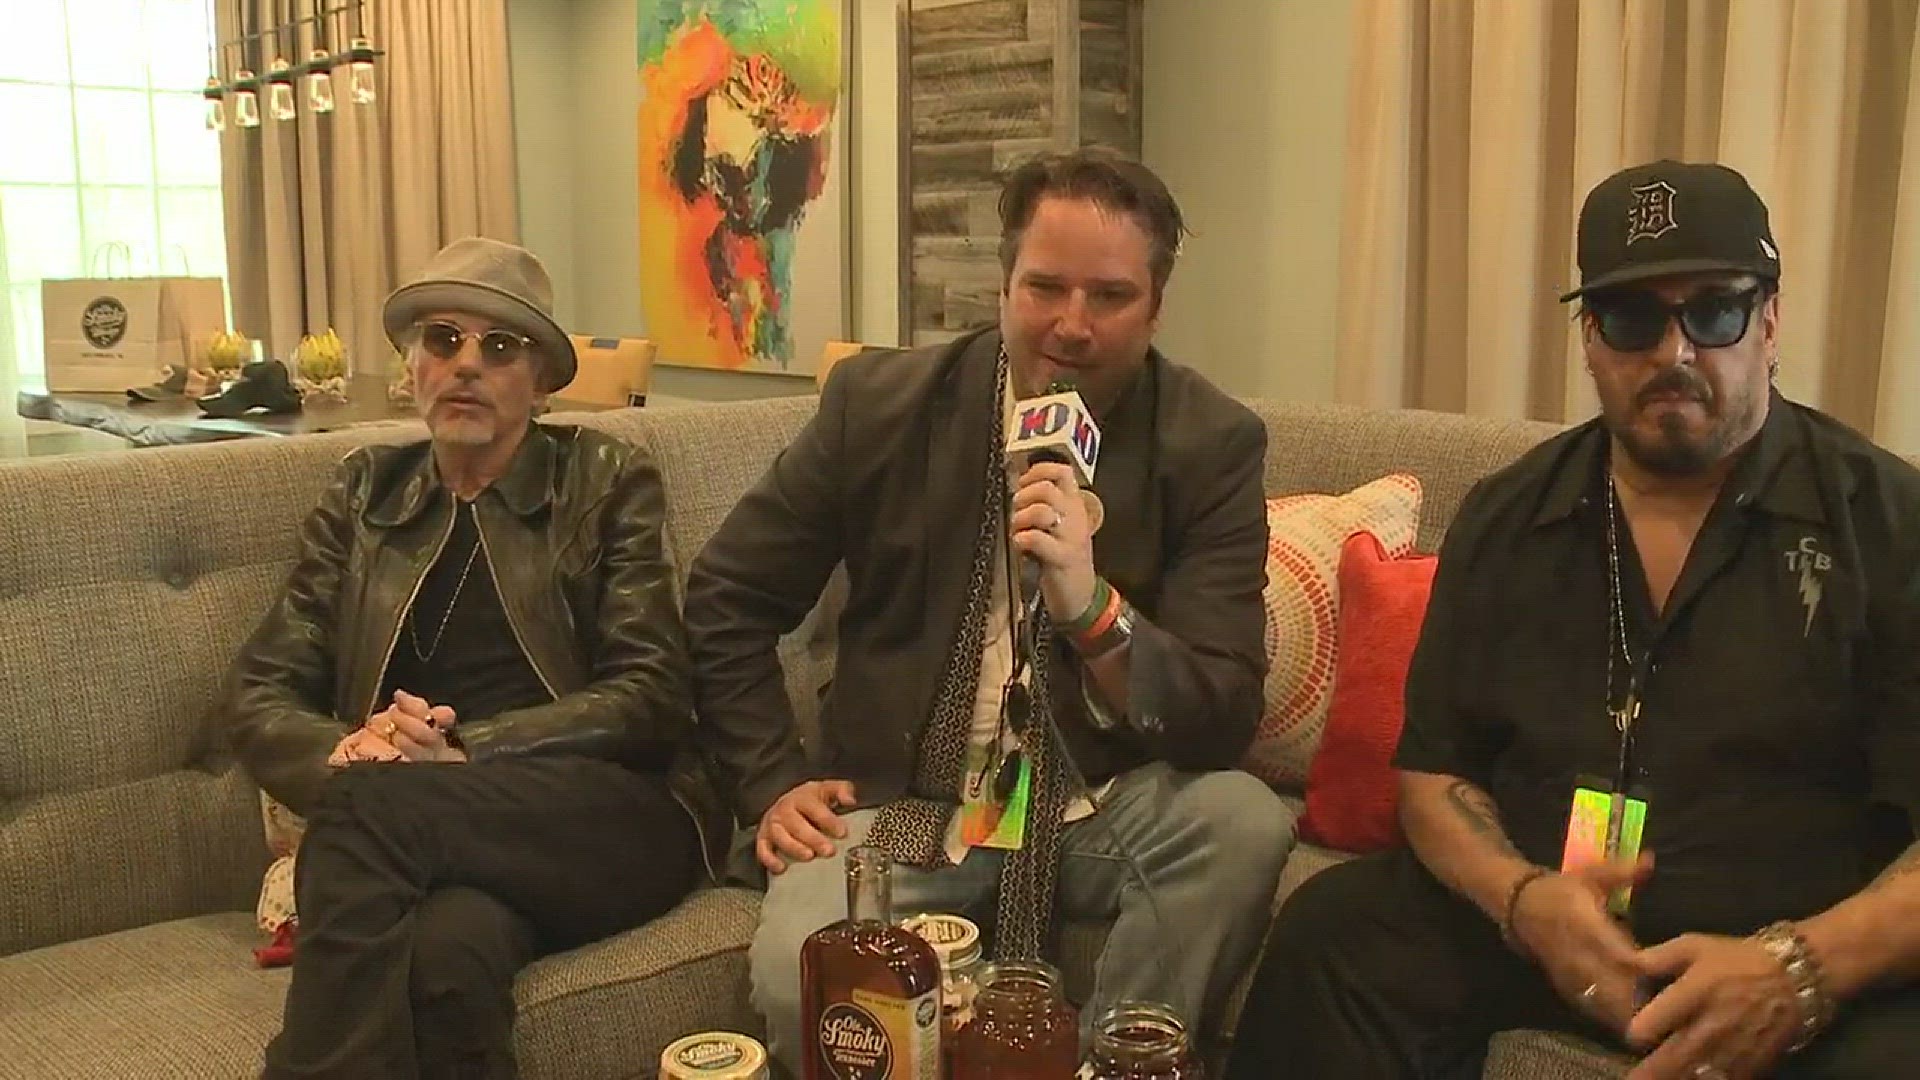 Full interview with Billy Bob Thornton and the Boxmasters